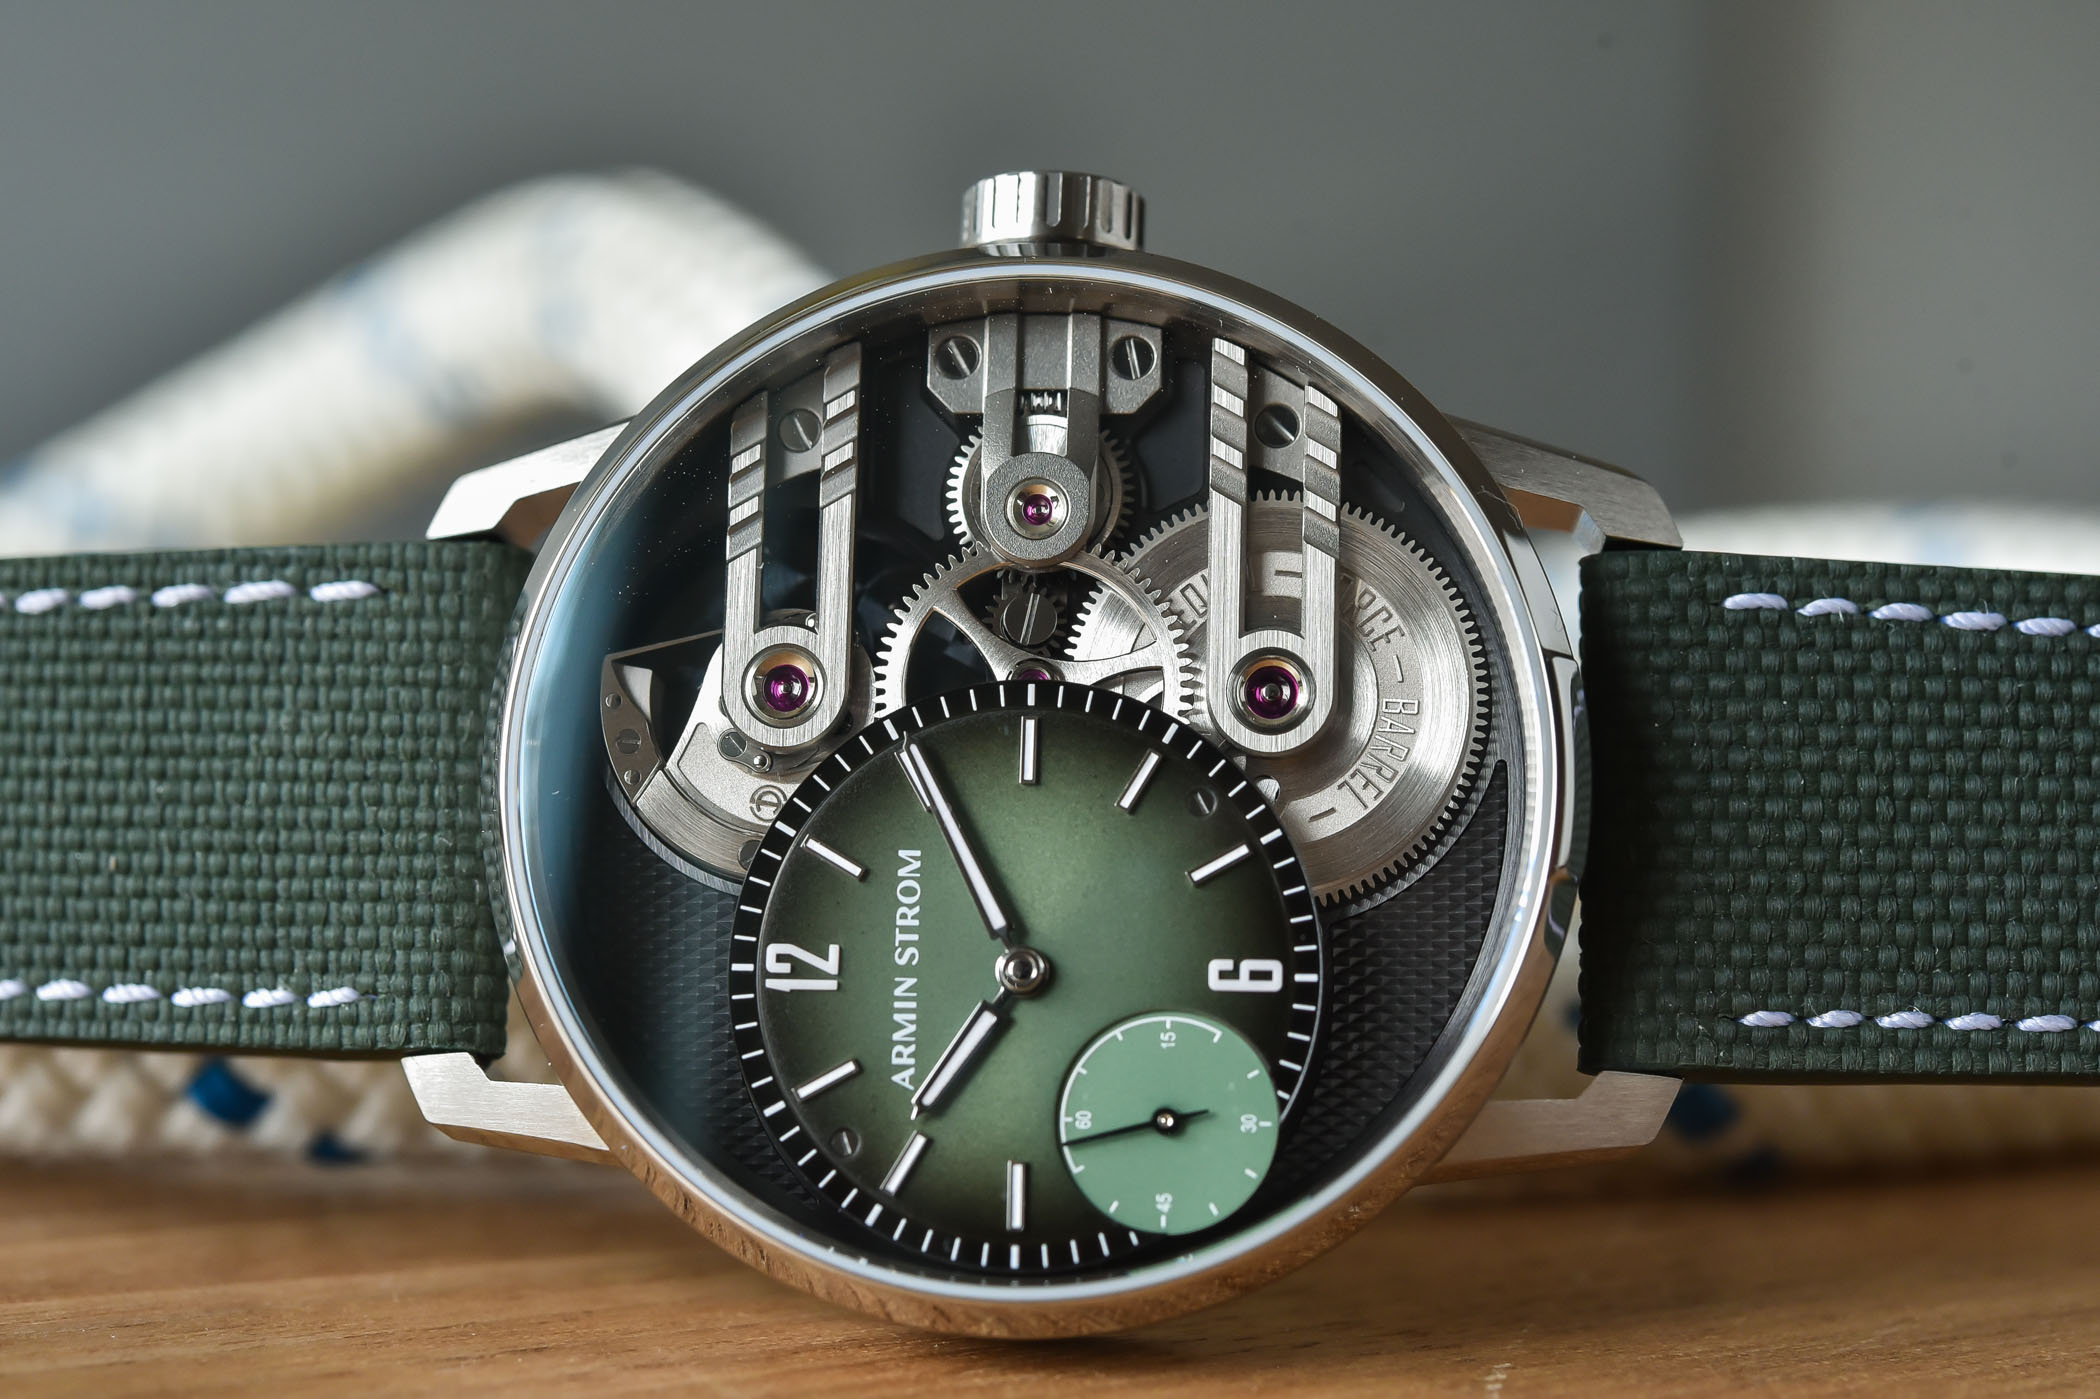 Armin Strom Gravity Equal Force P.03 for Collective Horology - Green dial Titanium Case - 6